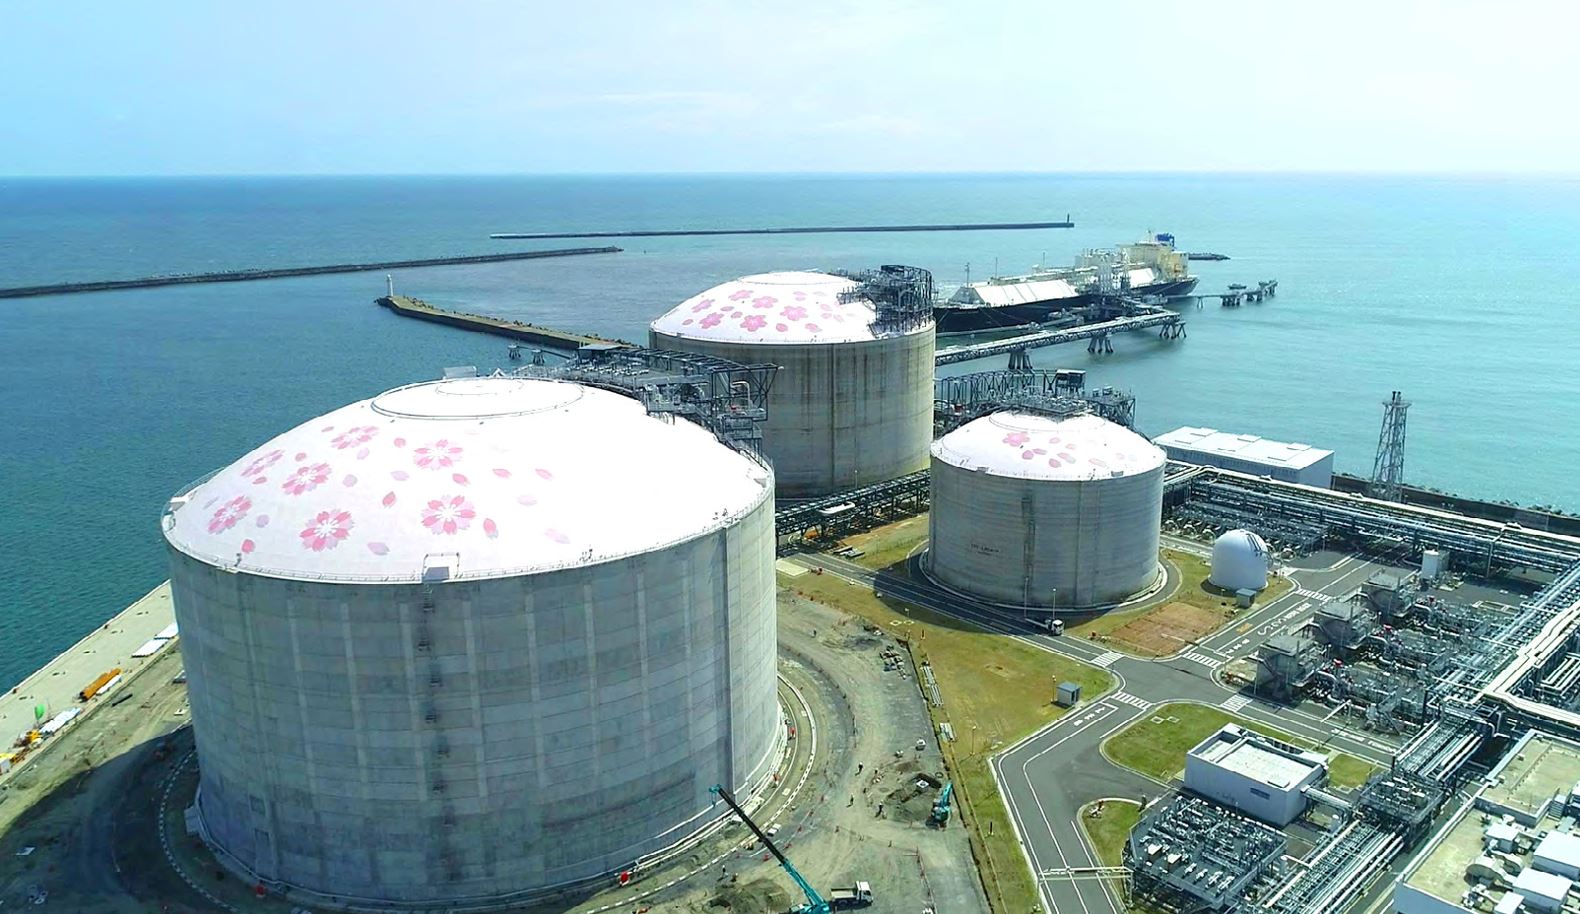 Japan’s LNG imports down 10 percent in February